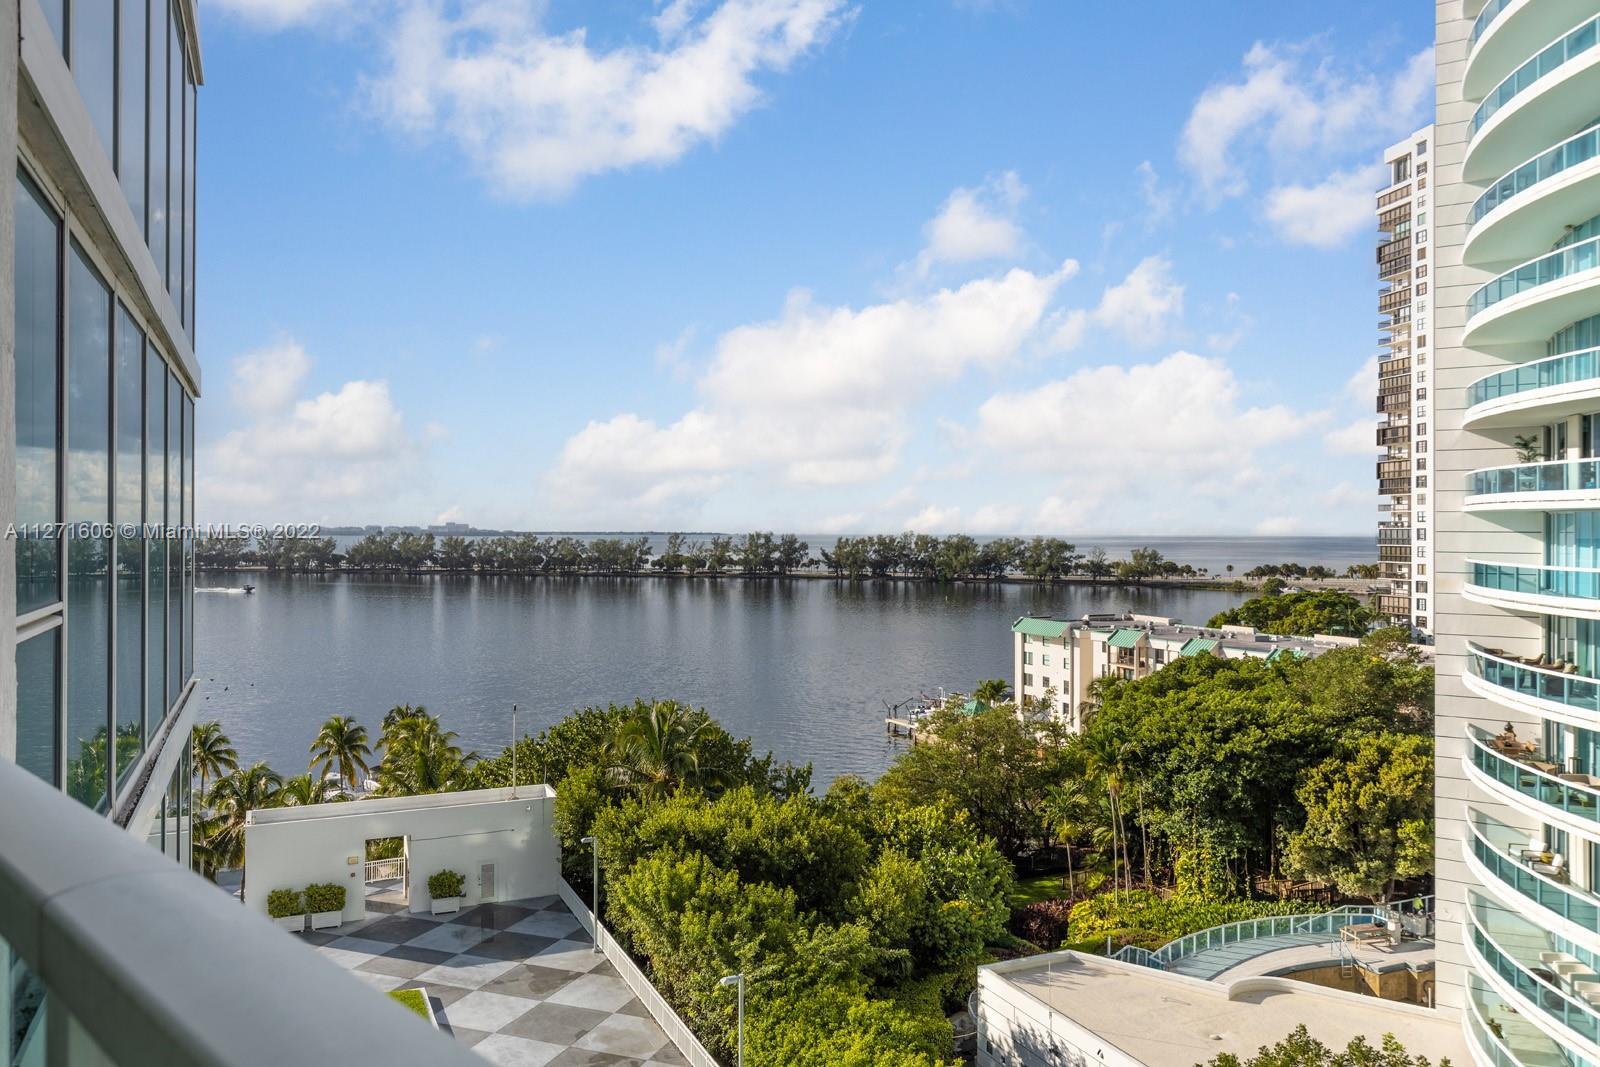 Enjoy bayfront living in this 1 bedroom, 1 bathroom unit located at Skyline on Brickell Avenue. This